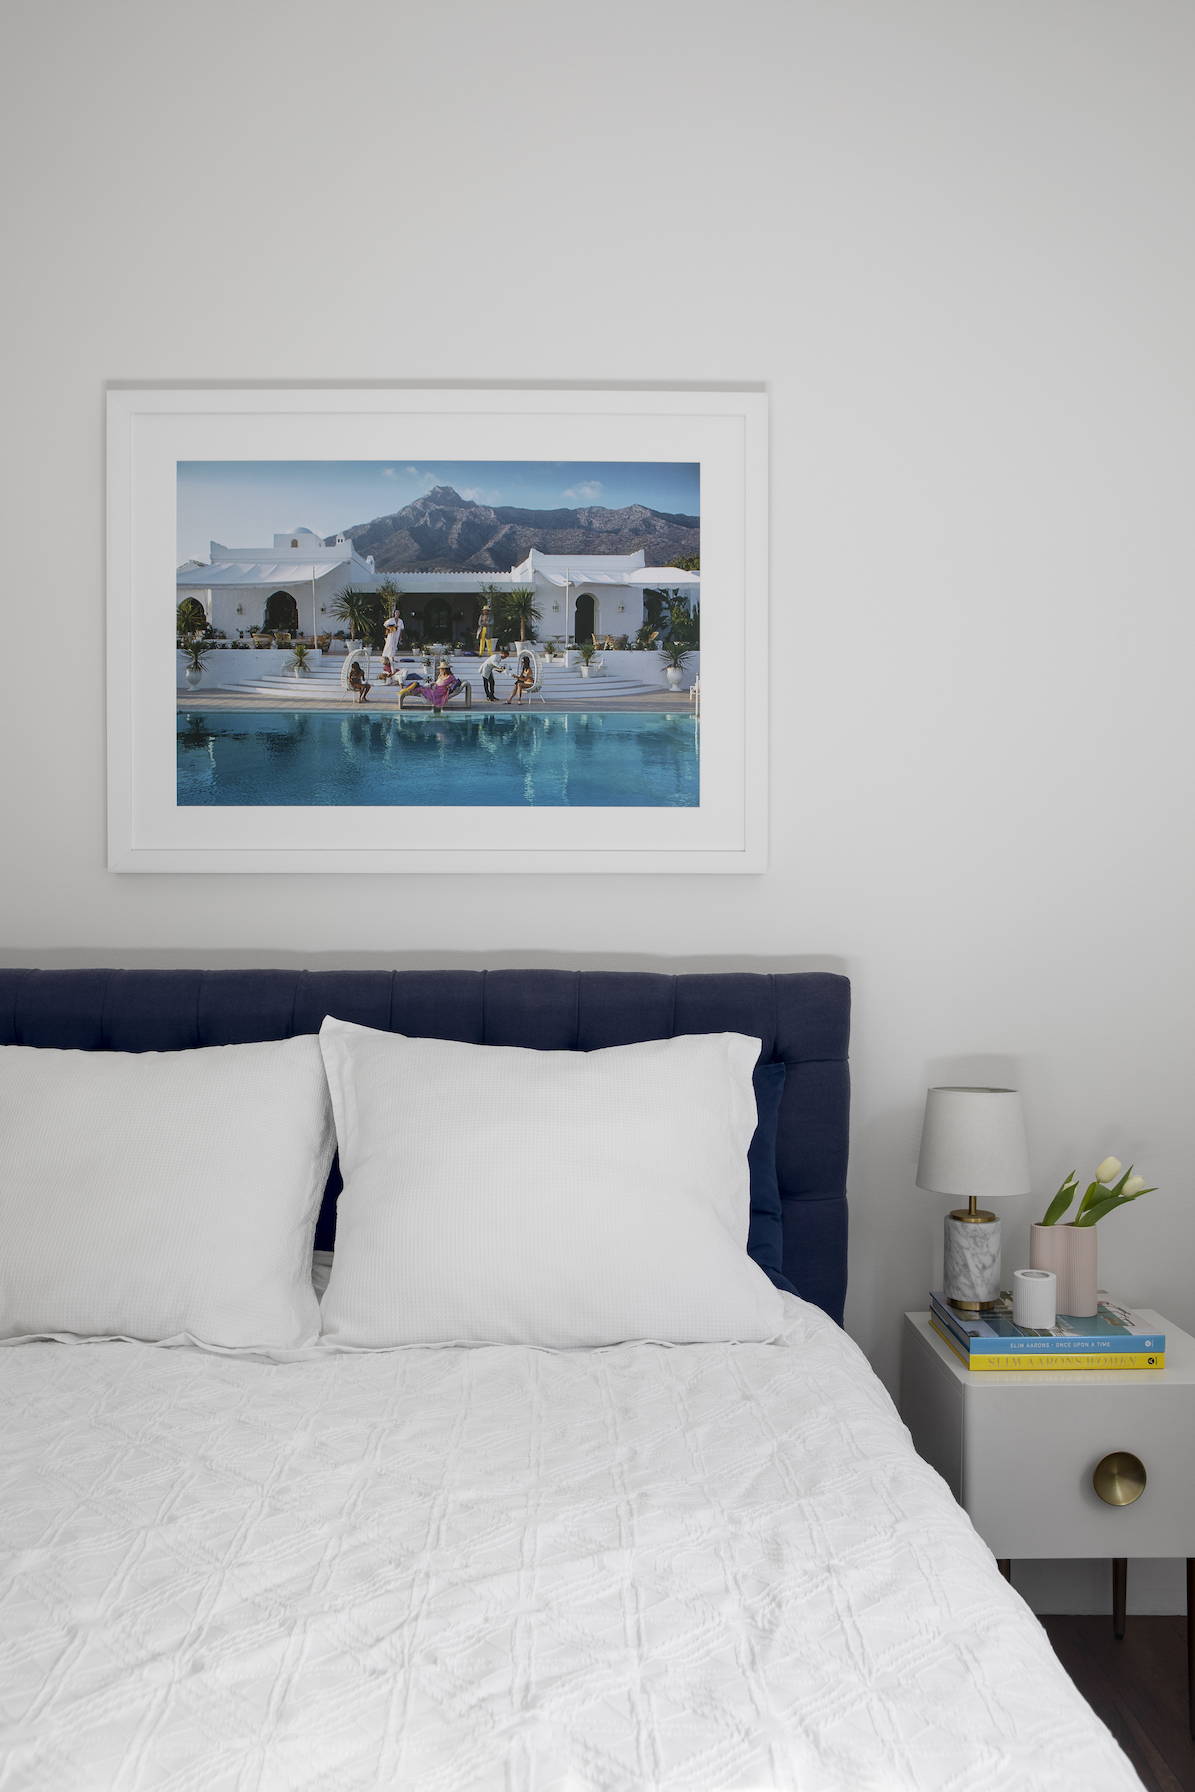 A poolside photograph by Slim Aarons, framed in white in a pretty bedroom setting